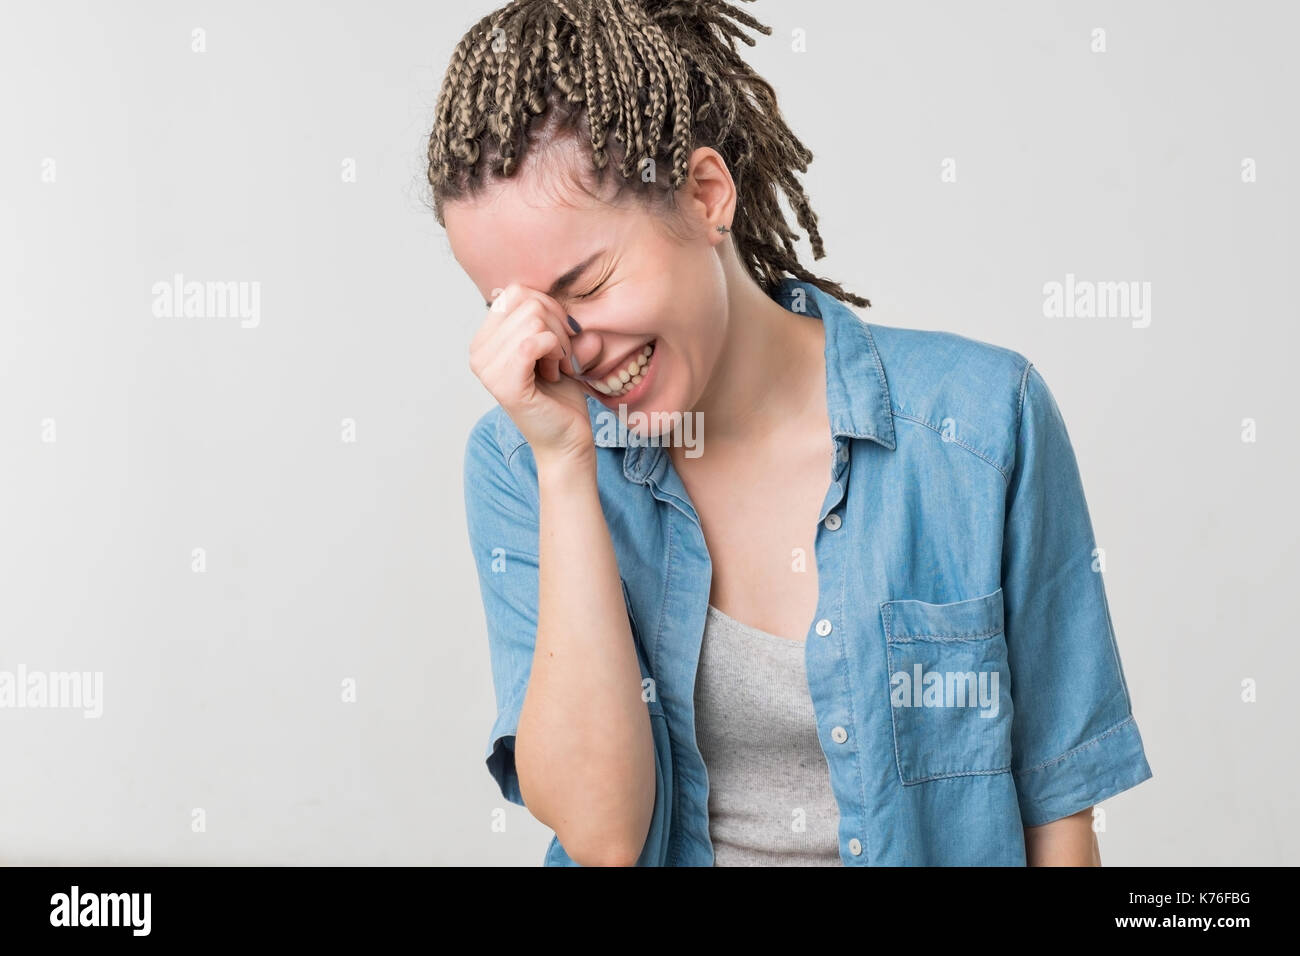 Close up portrait of a beautiful mid adult woman laughing with sweater Stock Photo